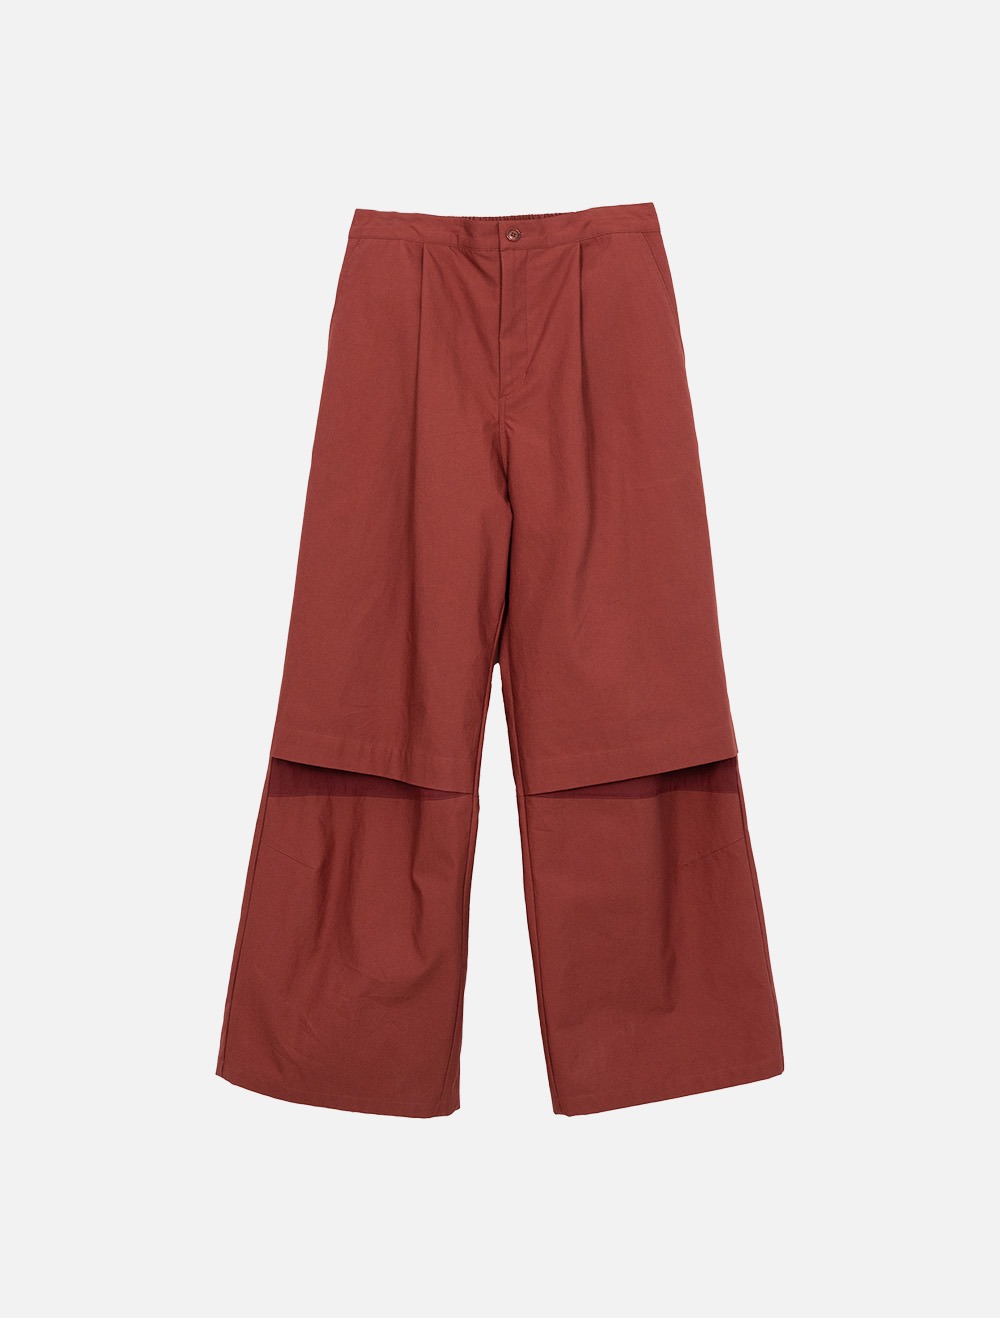 DIVISION TROUSER (MAROON)